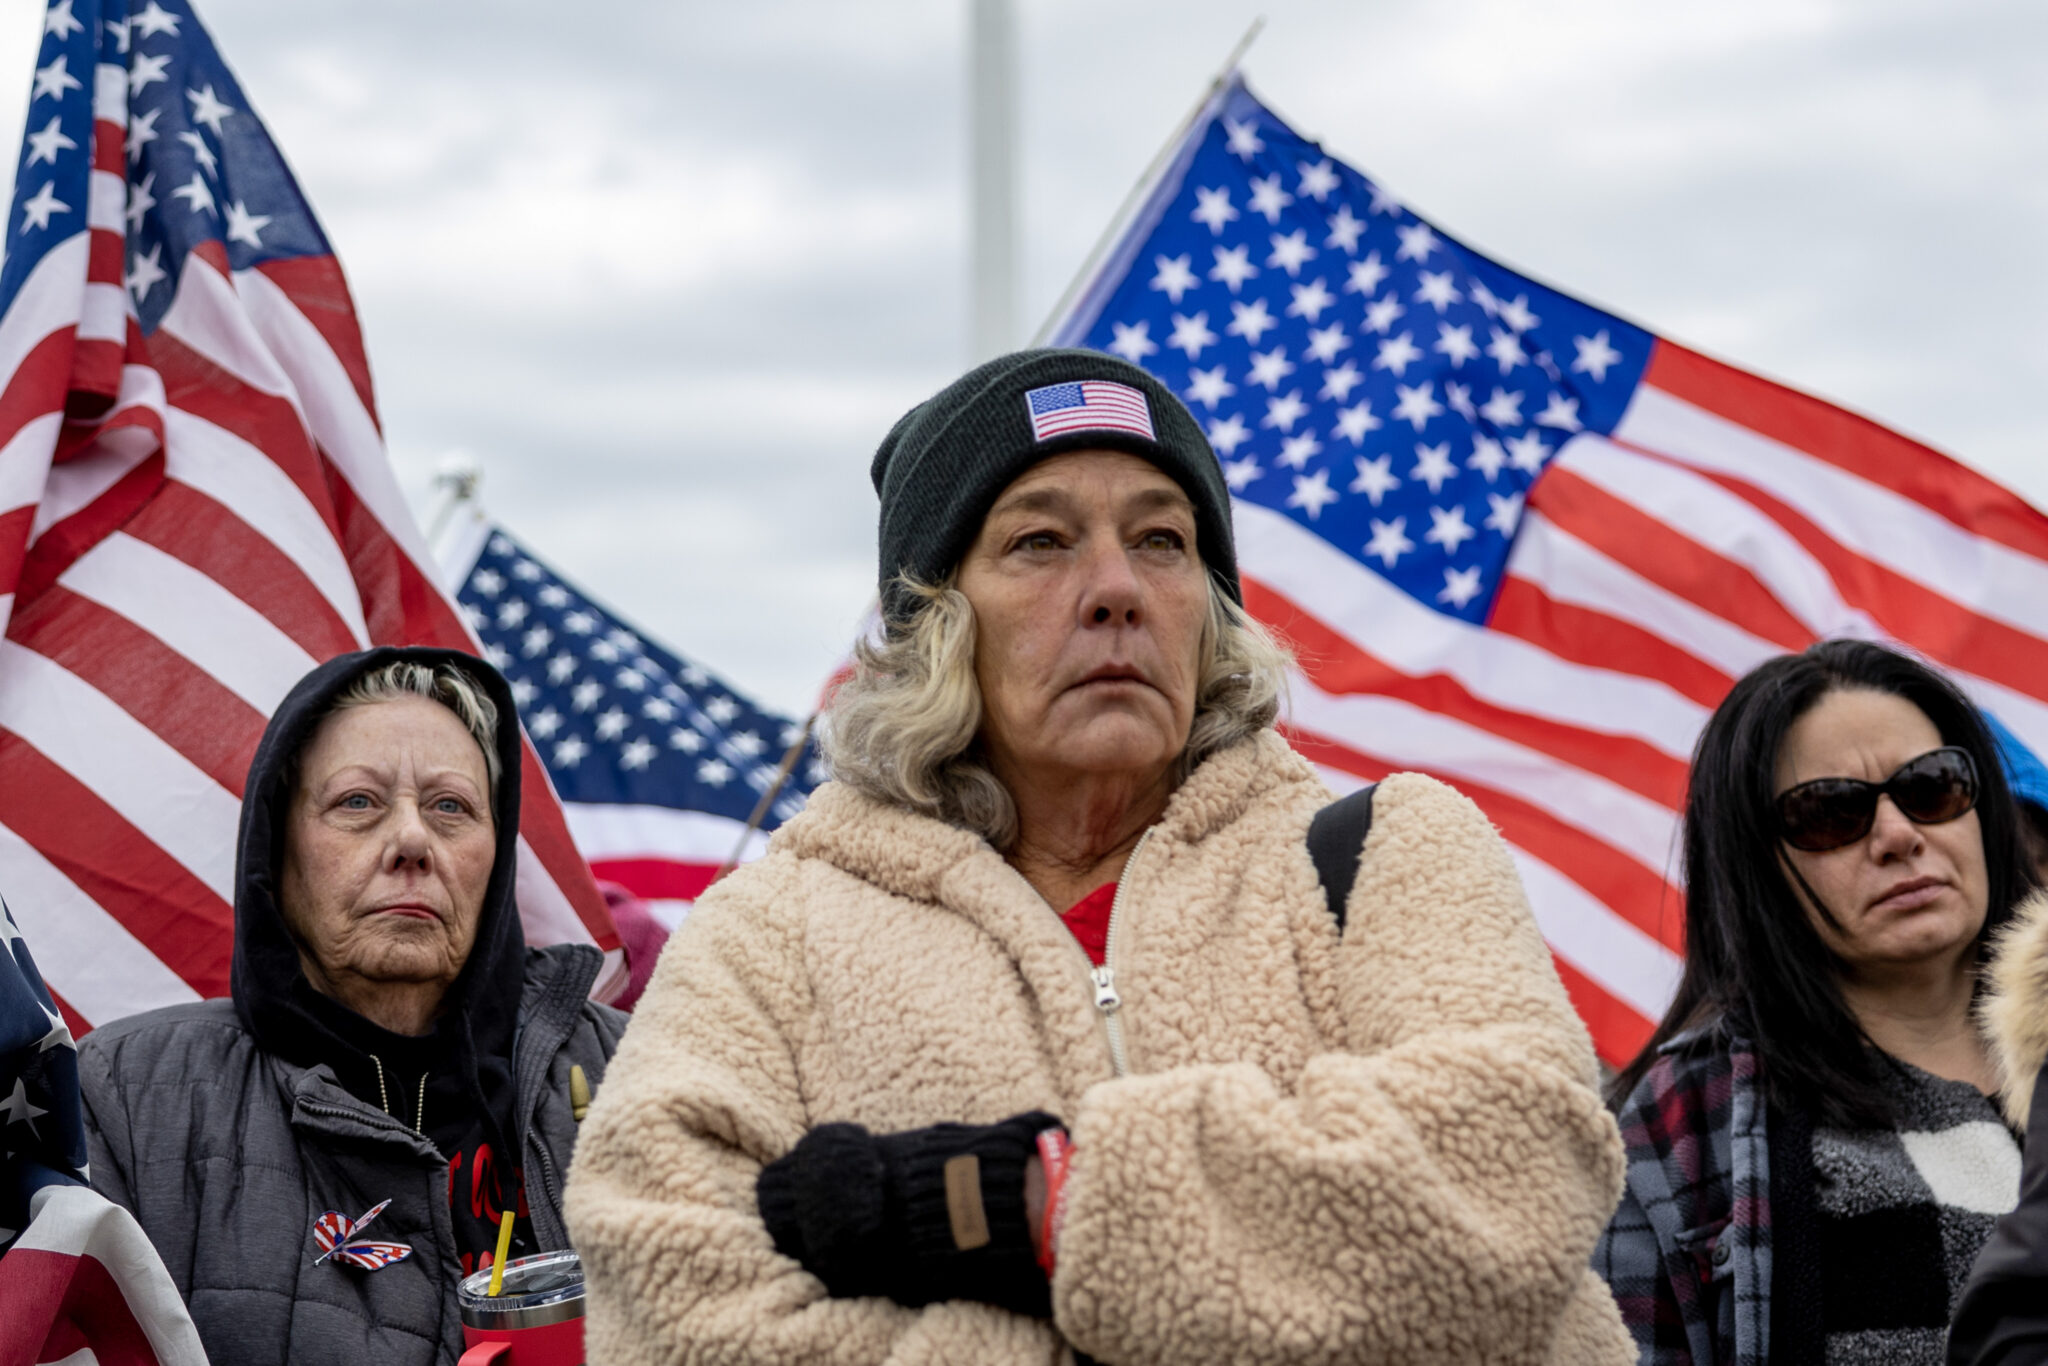 WASHINGTON, DC - JANUARY 06: Micki Witthoeft, mother of Ashli Babbitt, who was killed on Jan 6, 2021 stands with supporters of protesters that were arrested on Jan 6, 2021 as they protest outside the U.S. Supreme Court on the second anniversary of the January 6 insurrection of the U.S. Capitol on January 06, 2023 in Washington, DC. The small right-wing demonstration was in support of hundreds of people who were arrested and charged following the January 6 United States Capitol attack.  (Photo by Tasos Katopodis/Getty Images)